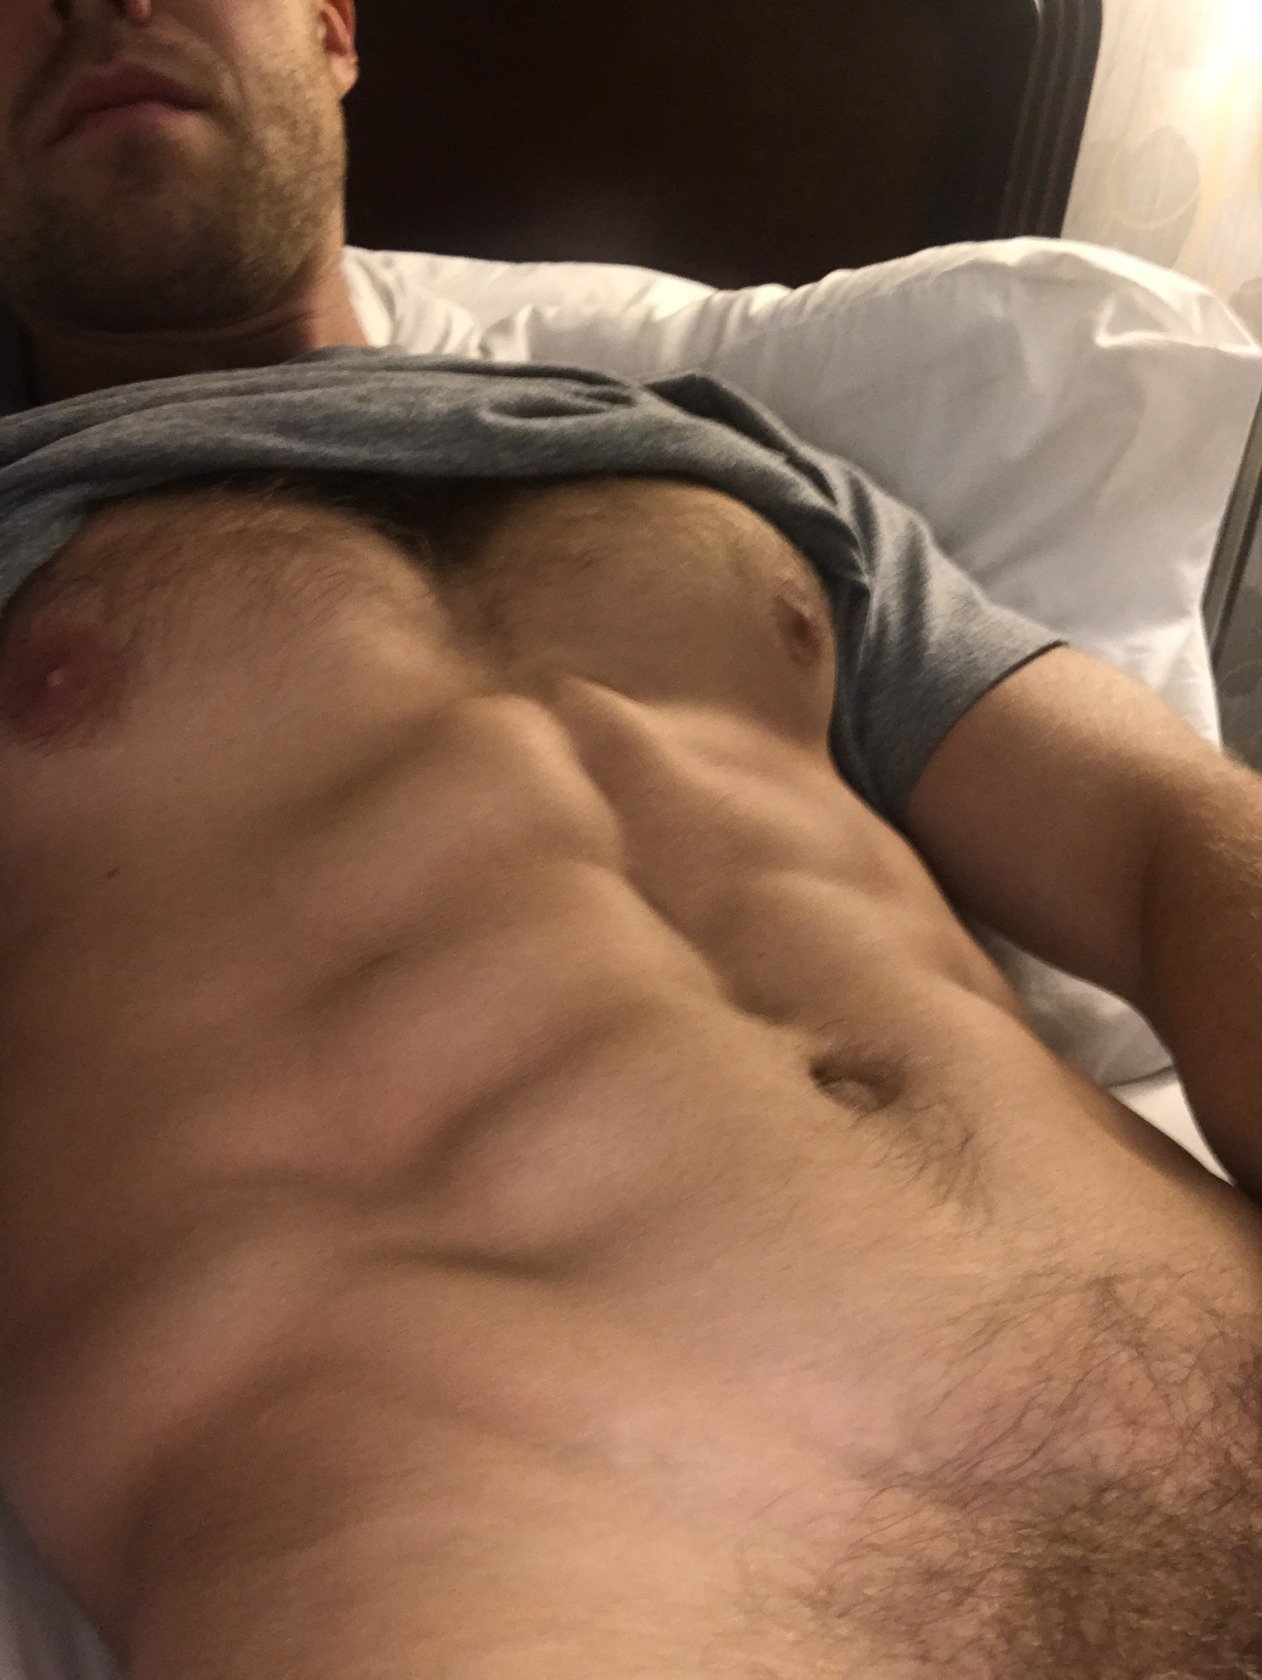 Showing off my V from my hotel bed